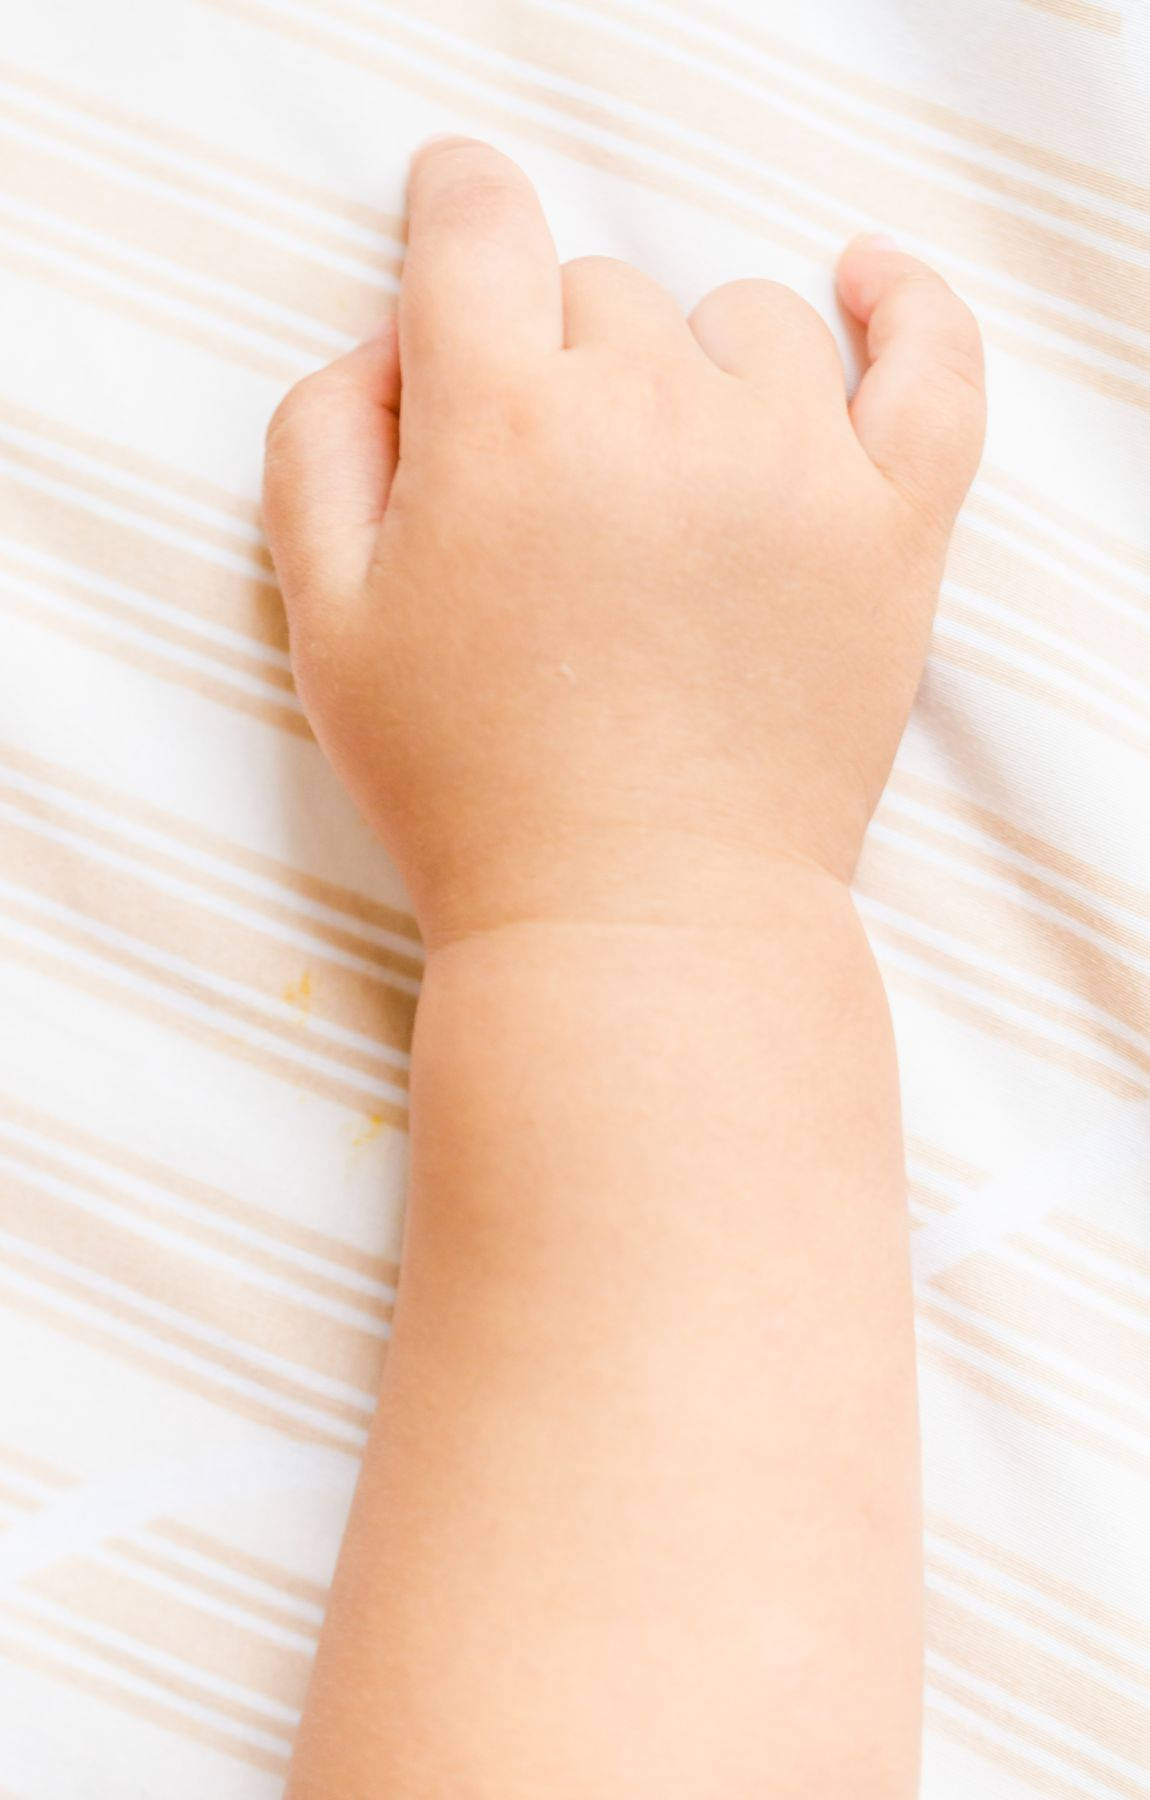 Baby Hand With Fair White Skin Wallpaper